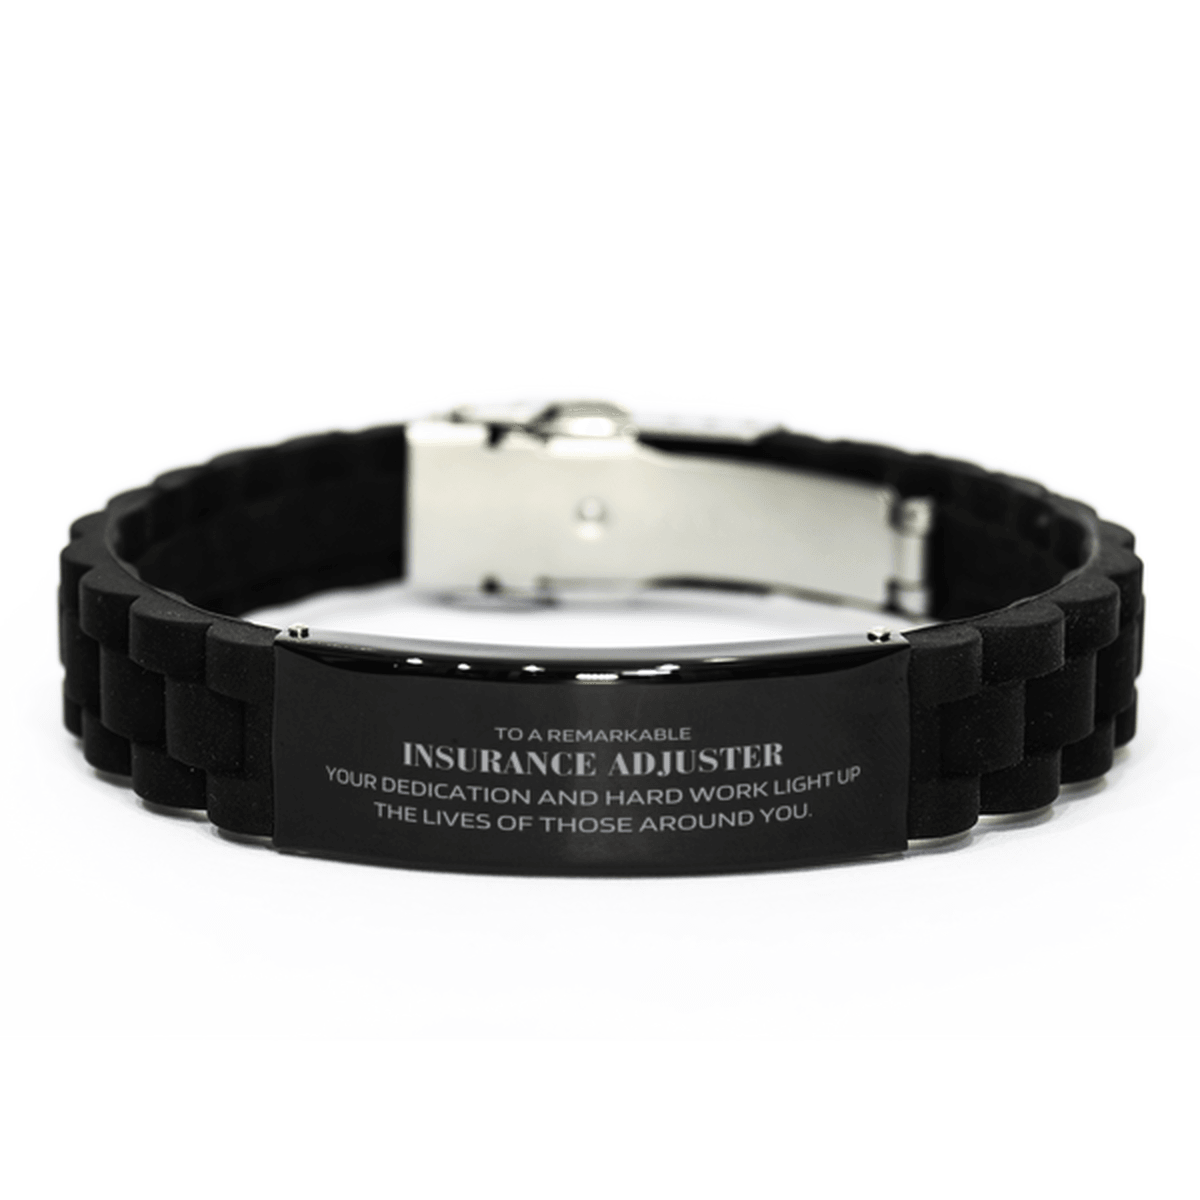 Remarkable Insurance Adjuster Gifts, Your dedication and hard work, Inspirational Birthday Christmas Unique Black Glidelock Clasp Bracelet For Insurance Adjuster, Coworkers, Men, Women, Friends - Mallard Moon Gift Shop